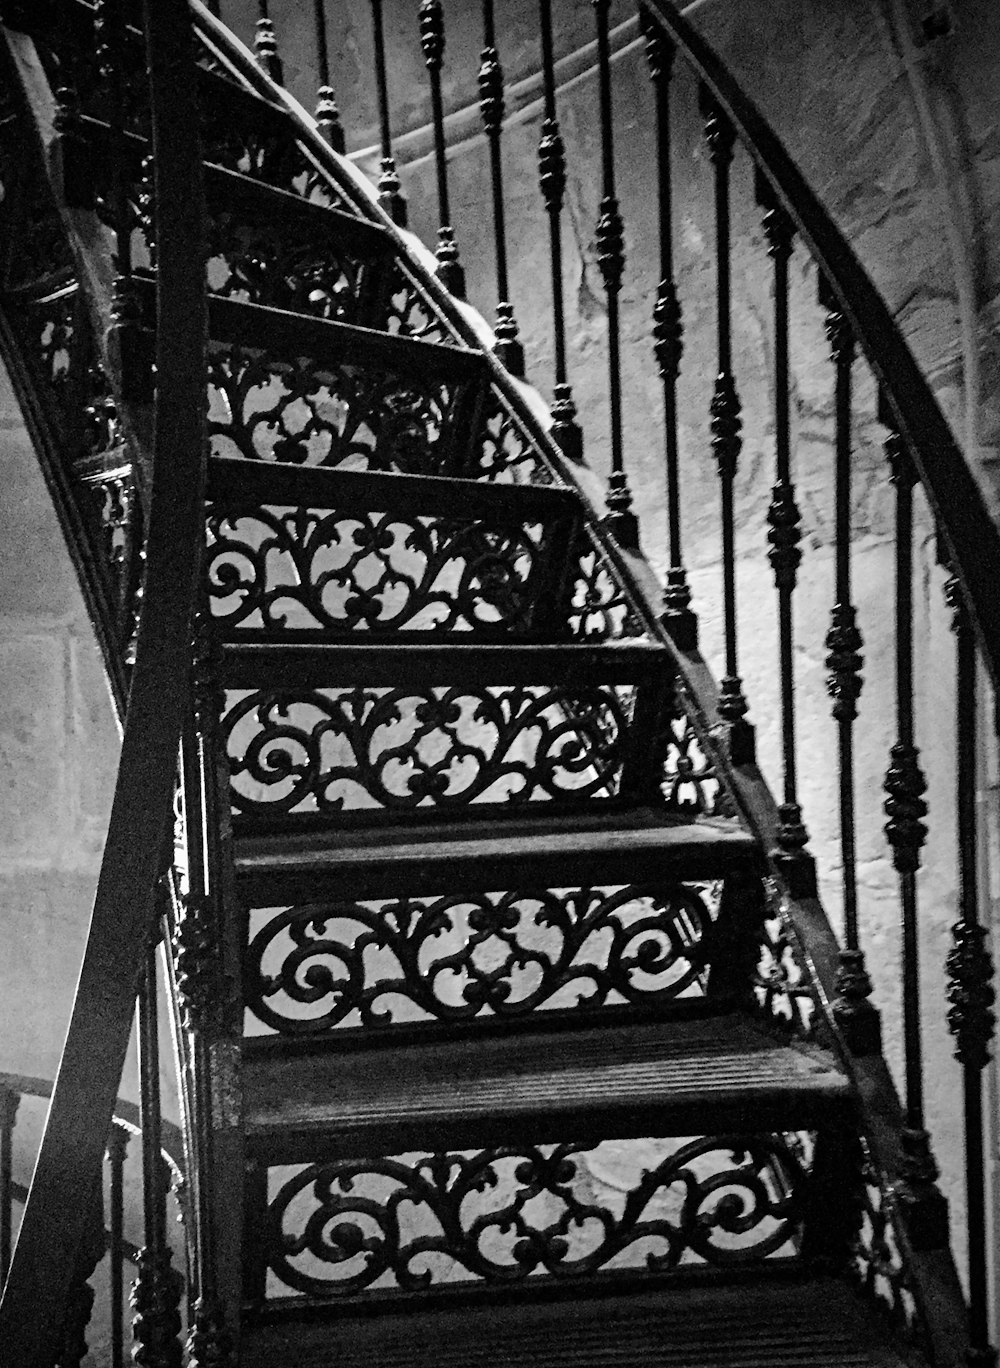 a black and white photo of a set of stairs